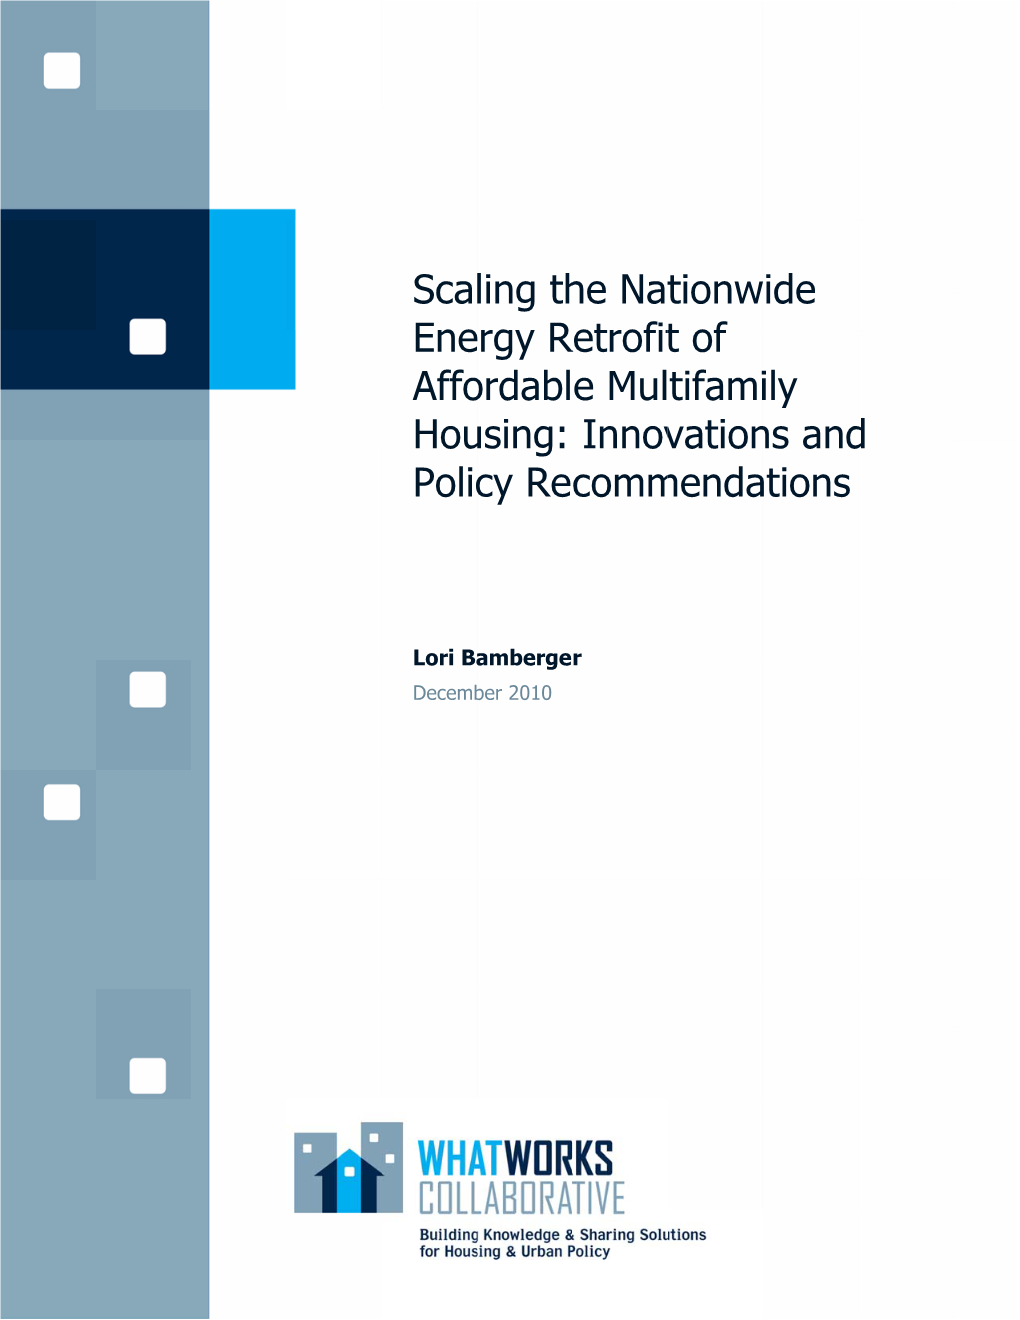 Scaling the Nationwide Energy Retrofit of Affordable Multifamily Housing: Innovations and Policy Recommendations